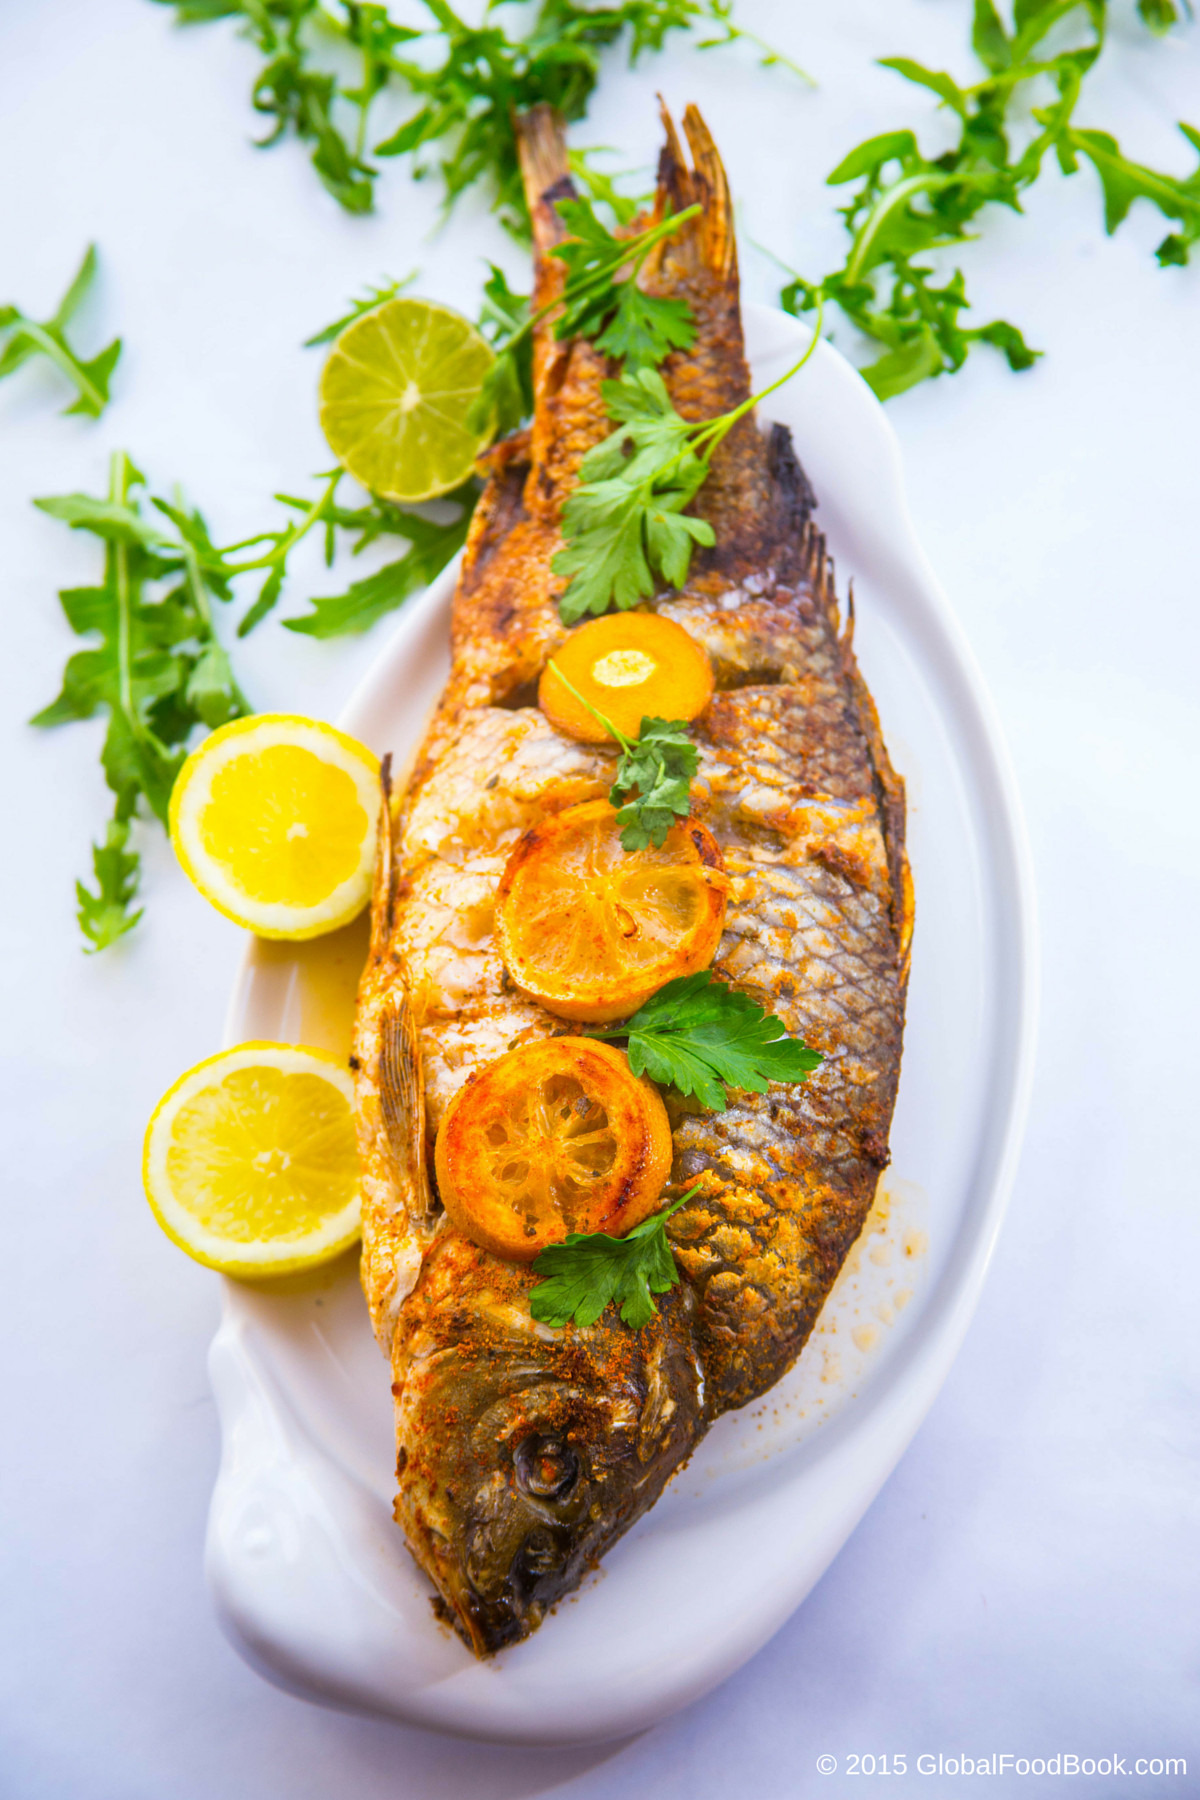 Recipes For Grilled Fish
 SPICY GRILLED CROAKER FISH